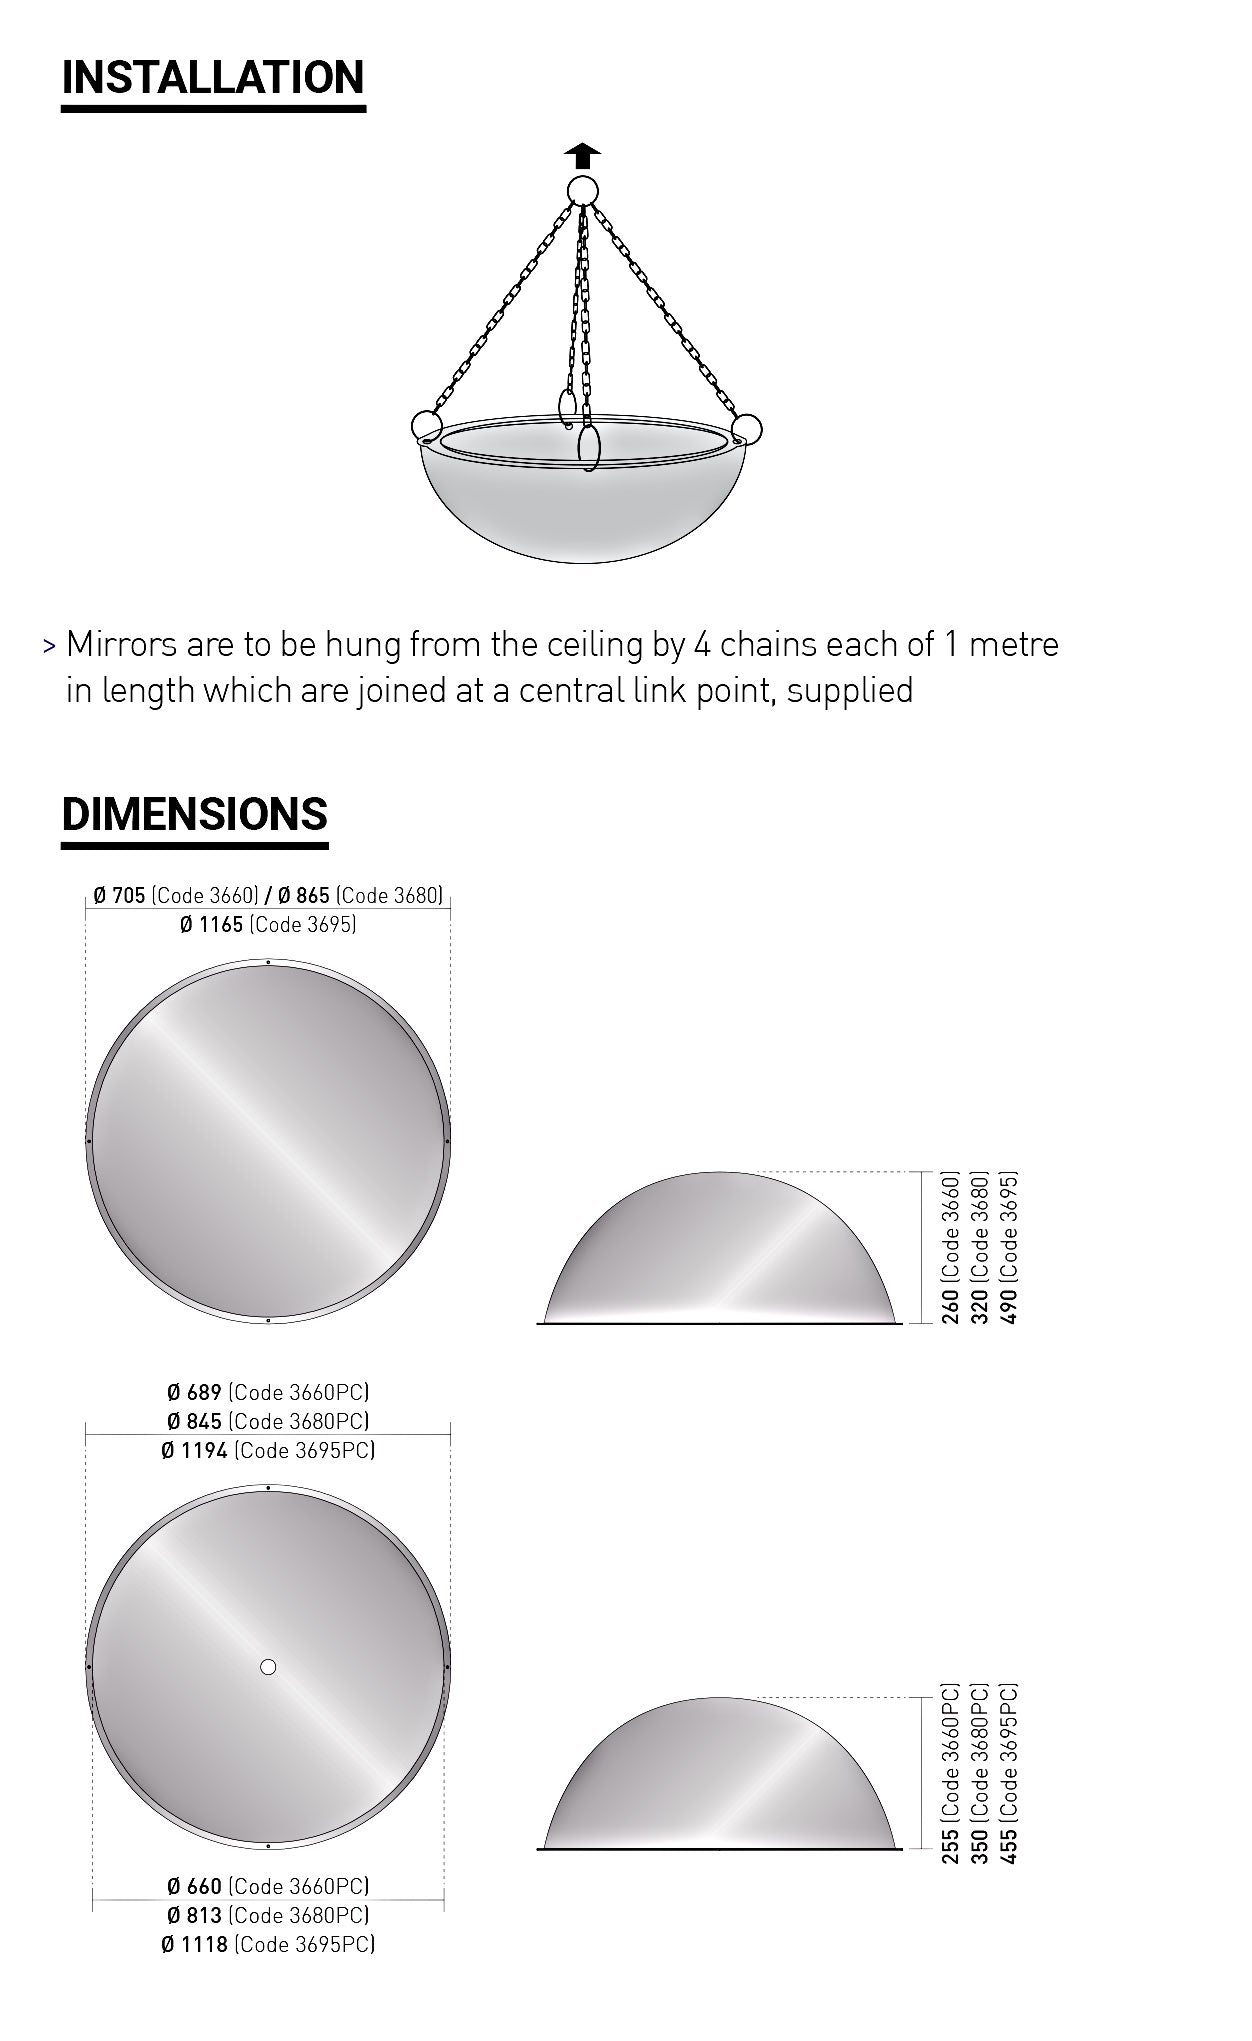 Ceiling-Mounted Hemisphere Mirrors PMMA & Polycarbonate Solutions for Industrial Traffic Guidance